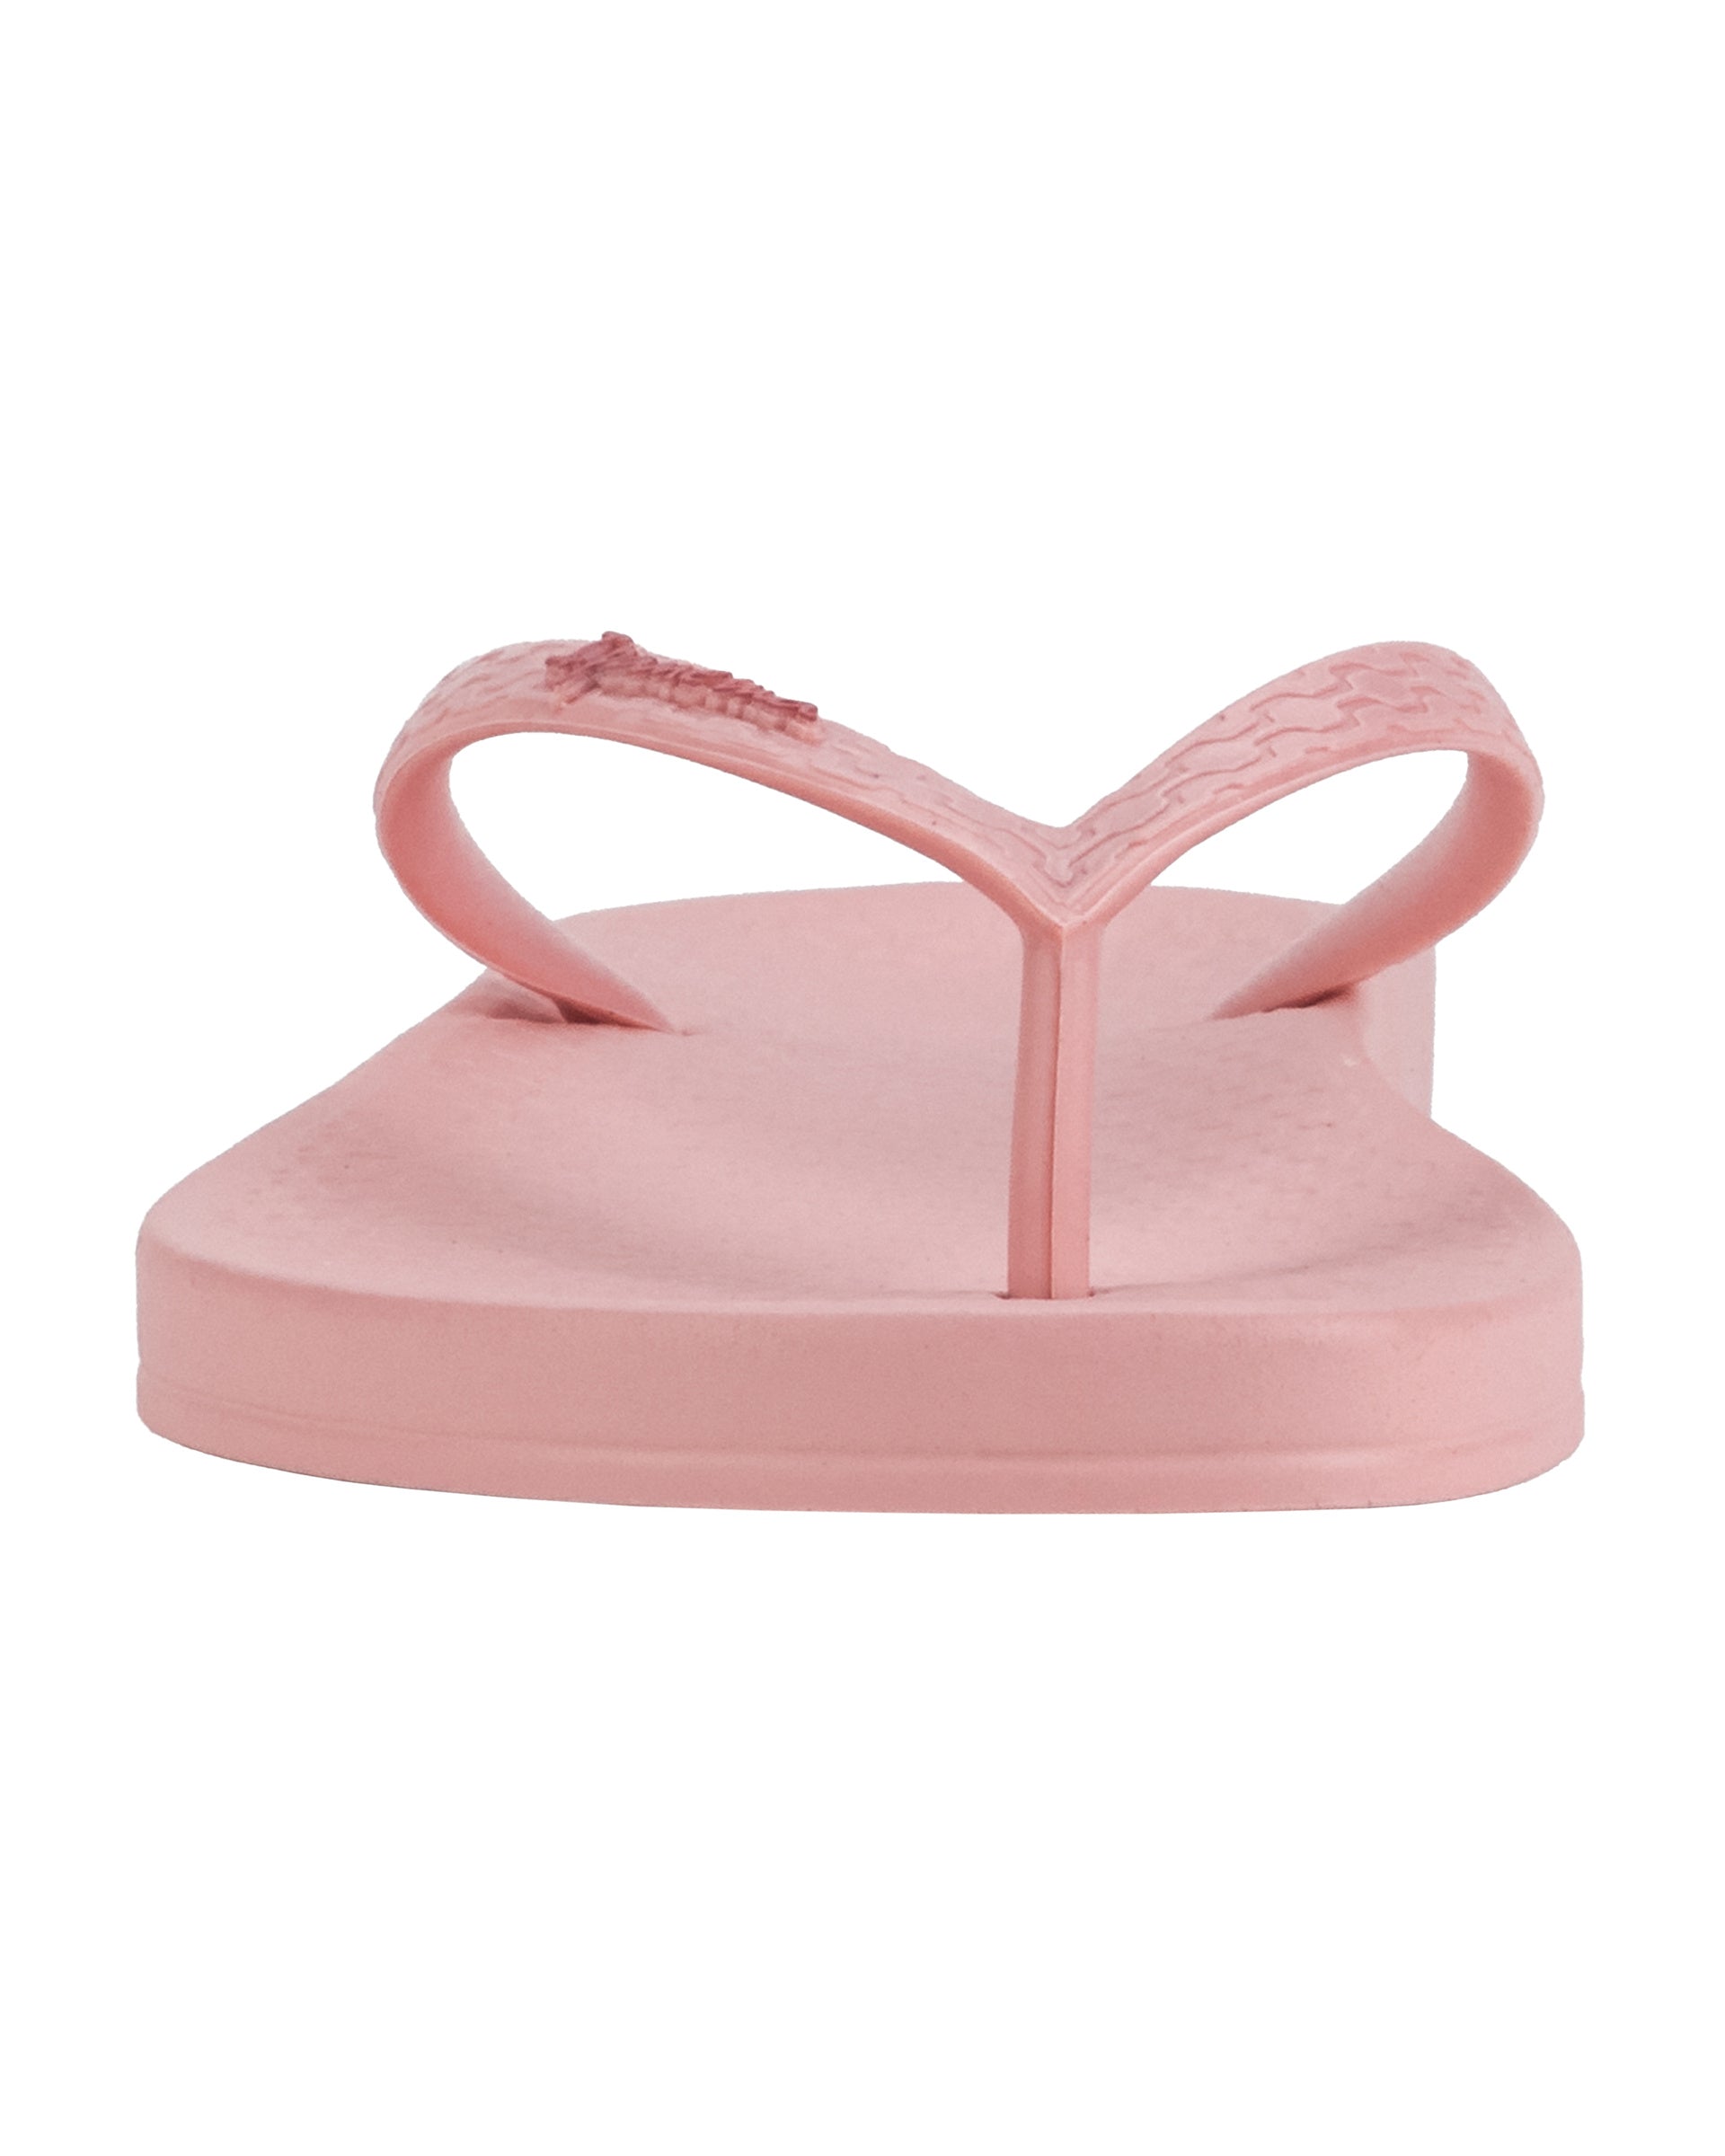 Front view of a pink Ipanema Ana Colors women's flip flop.